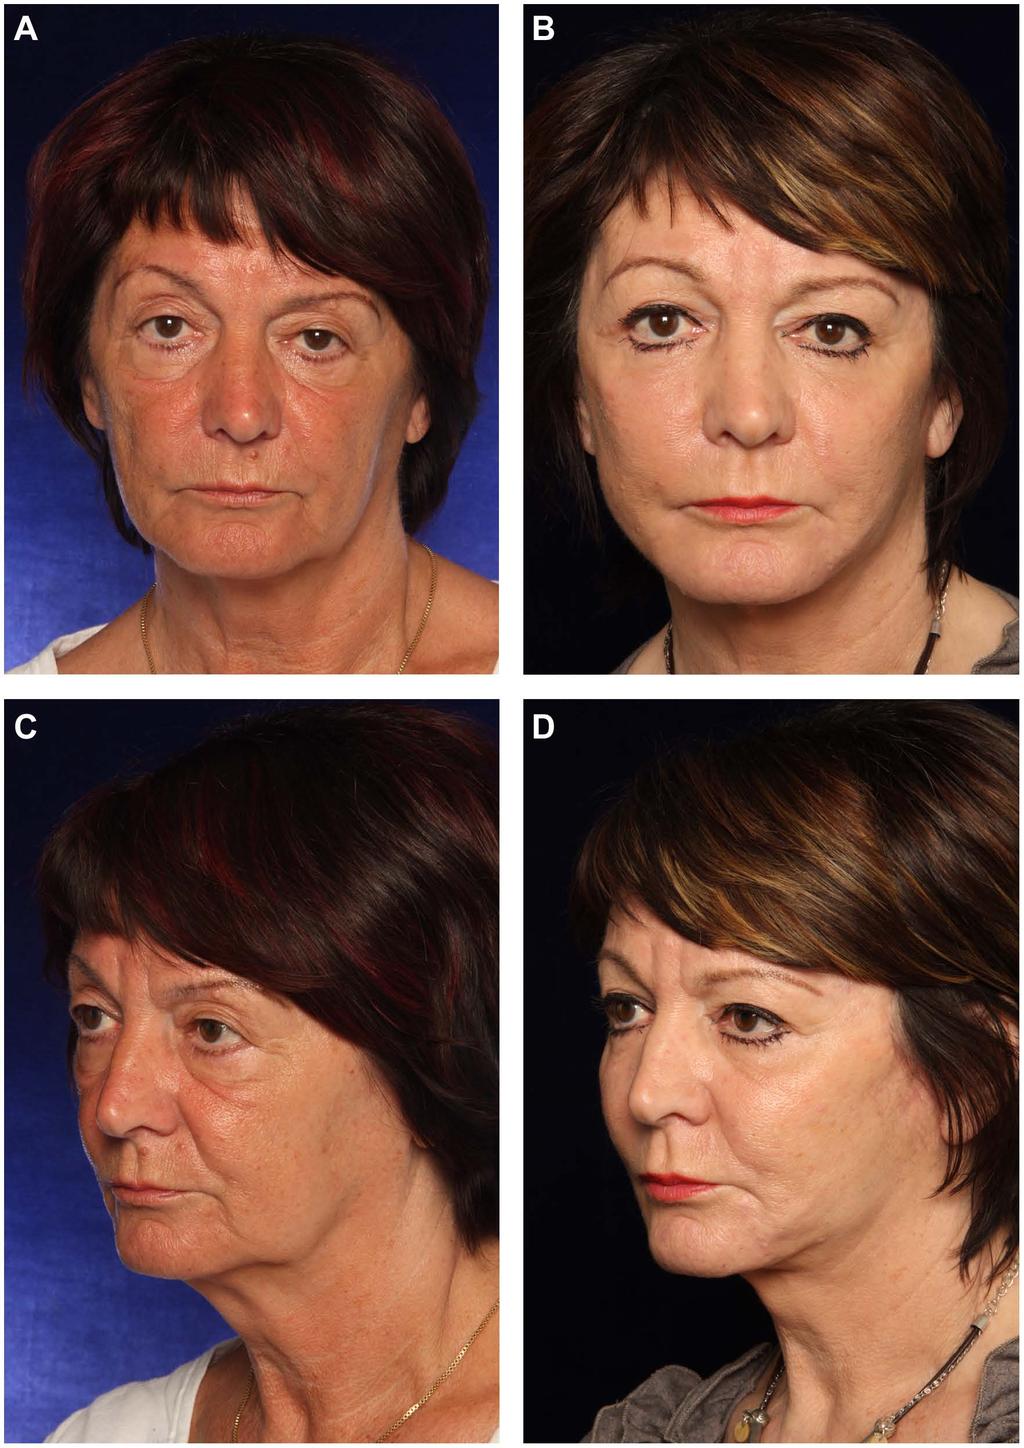 350 Aesthetic Surgery Journal 33(3) Figure 10. (A, C) This 60-year-old woman presented for total facial rejuvenation.